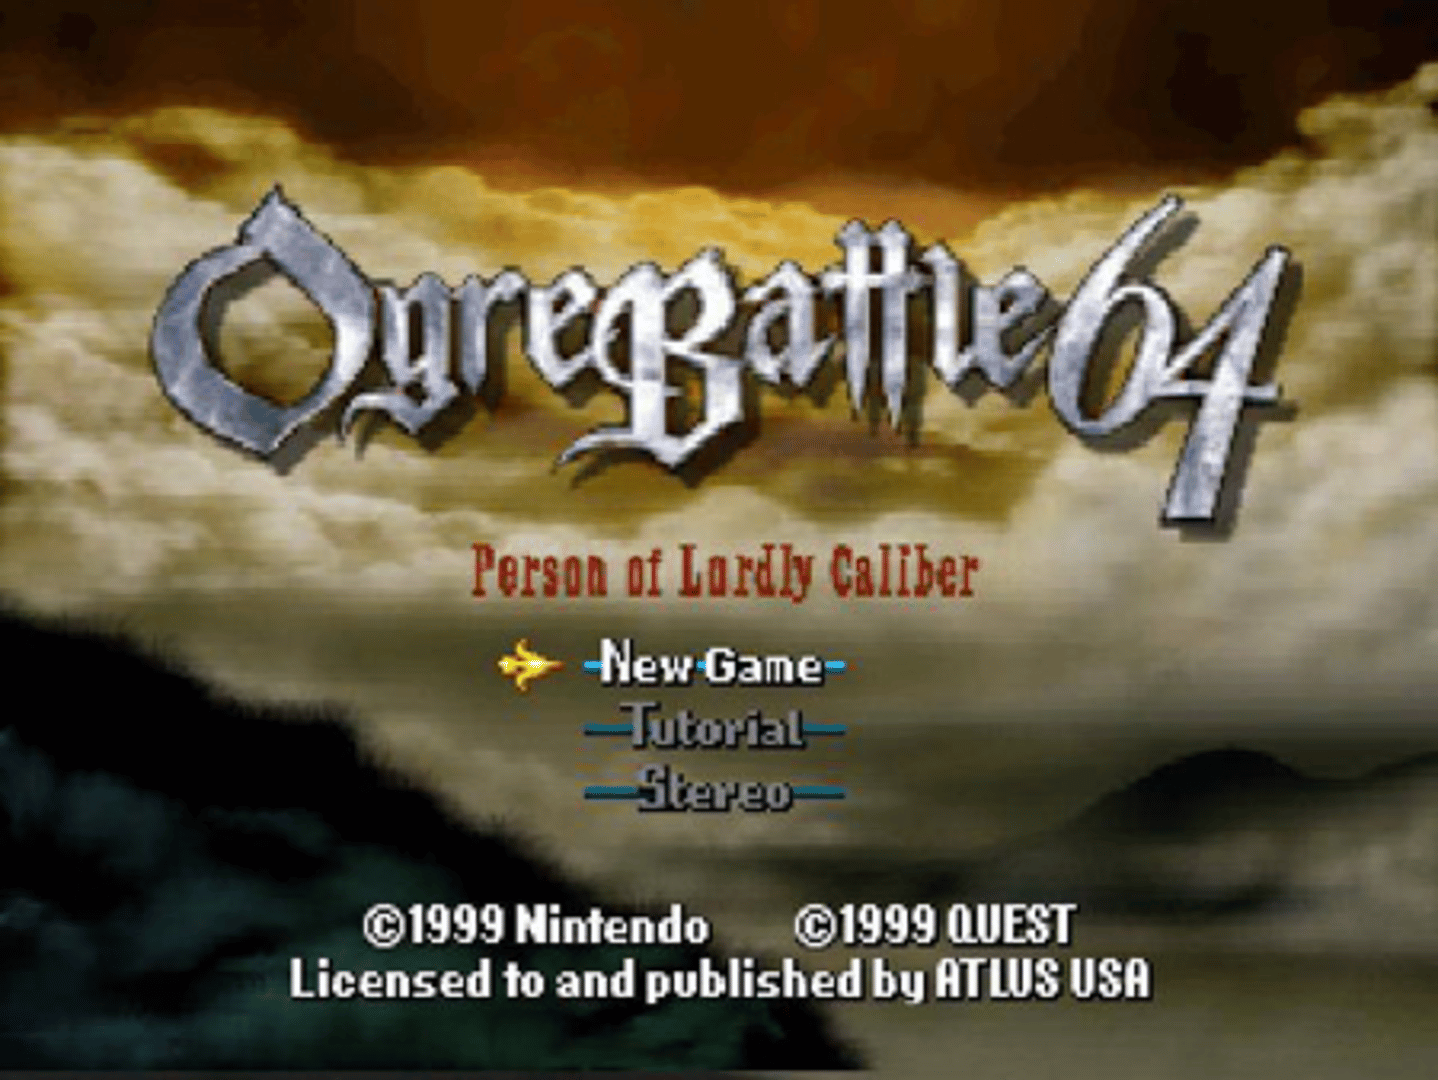 Ogre Battle 64: Person of Lordly Caliber screenshot